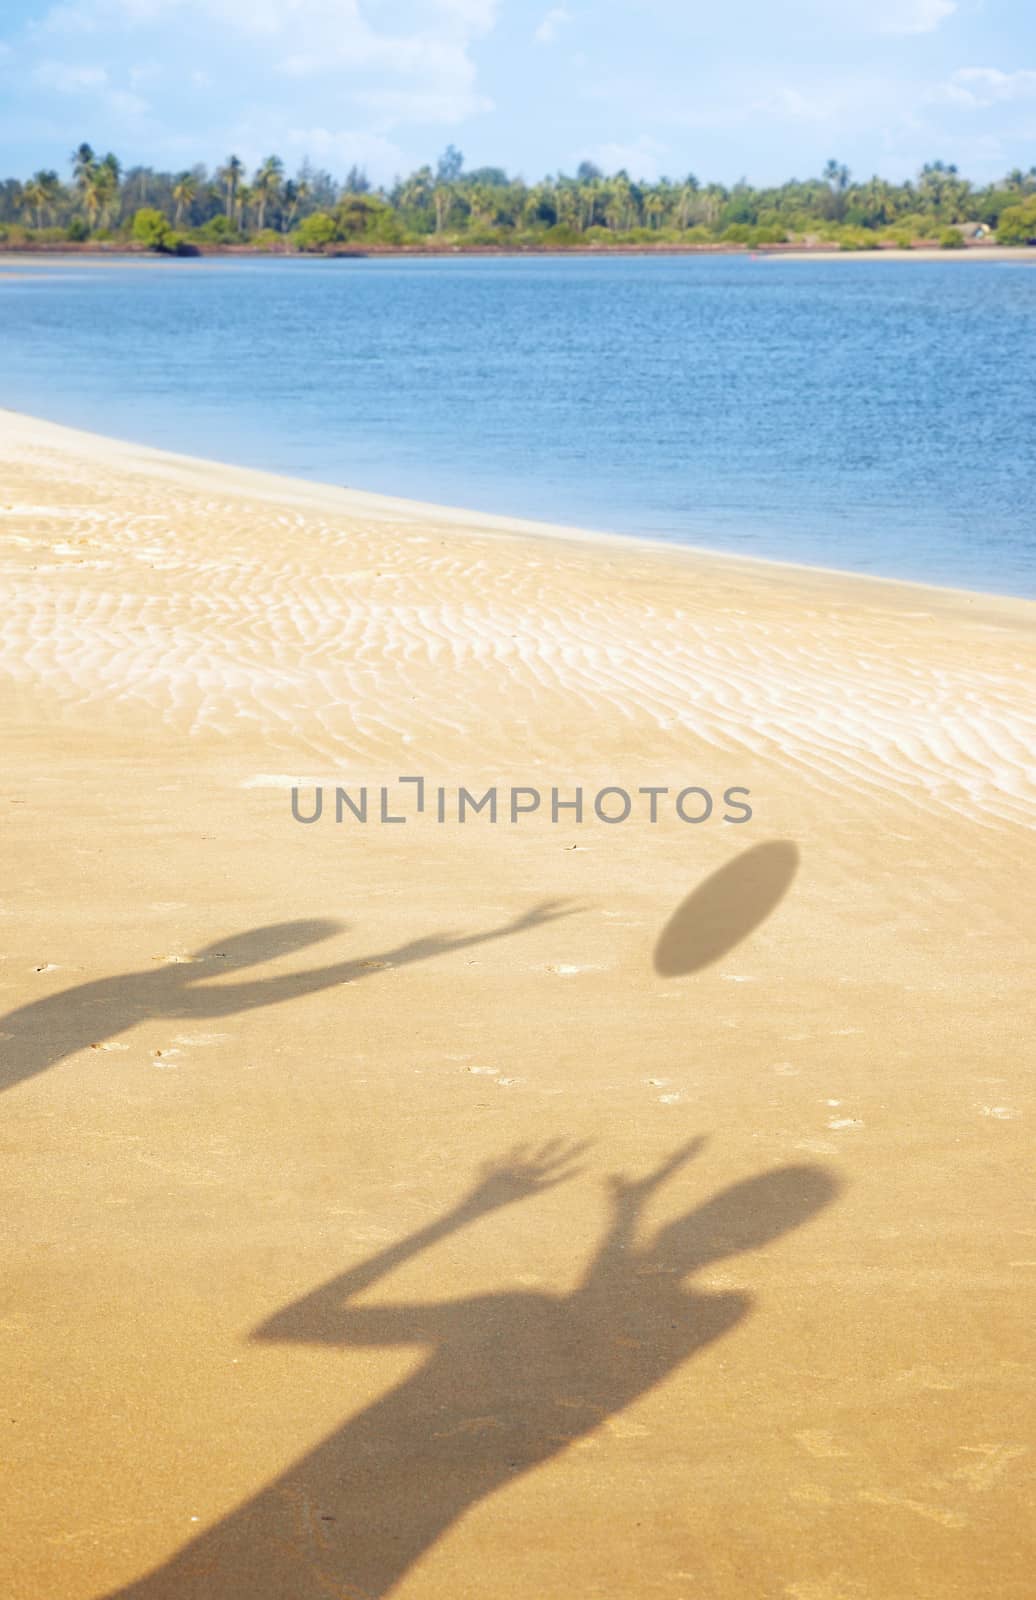 Shadows of two people playing with ball at the summer beach. Vertical photo with vibrant colors